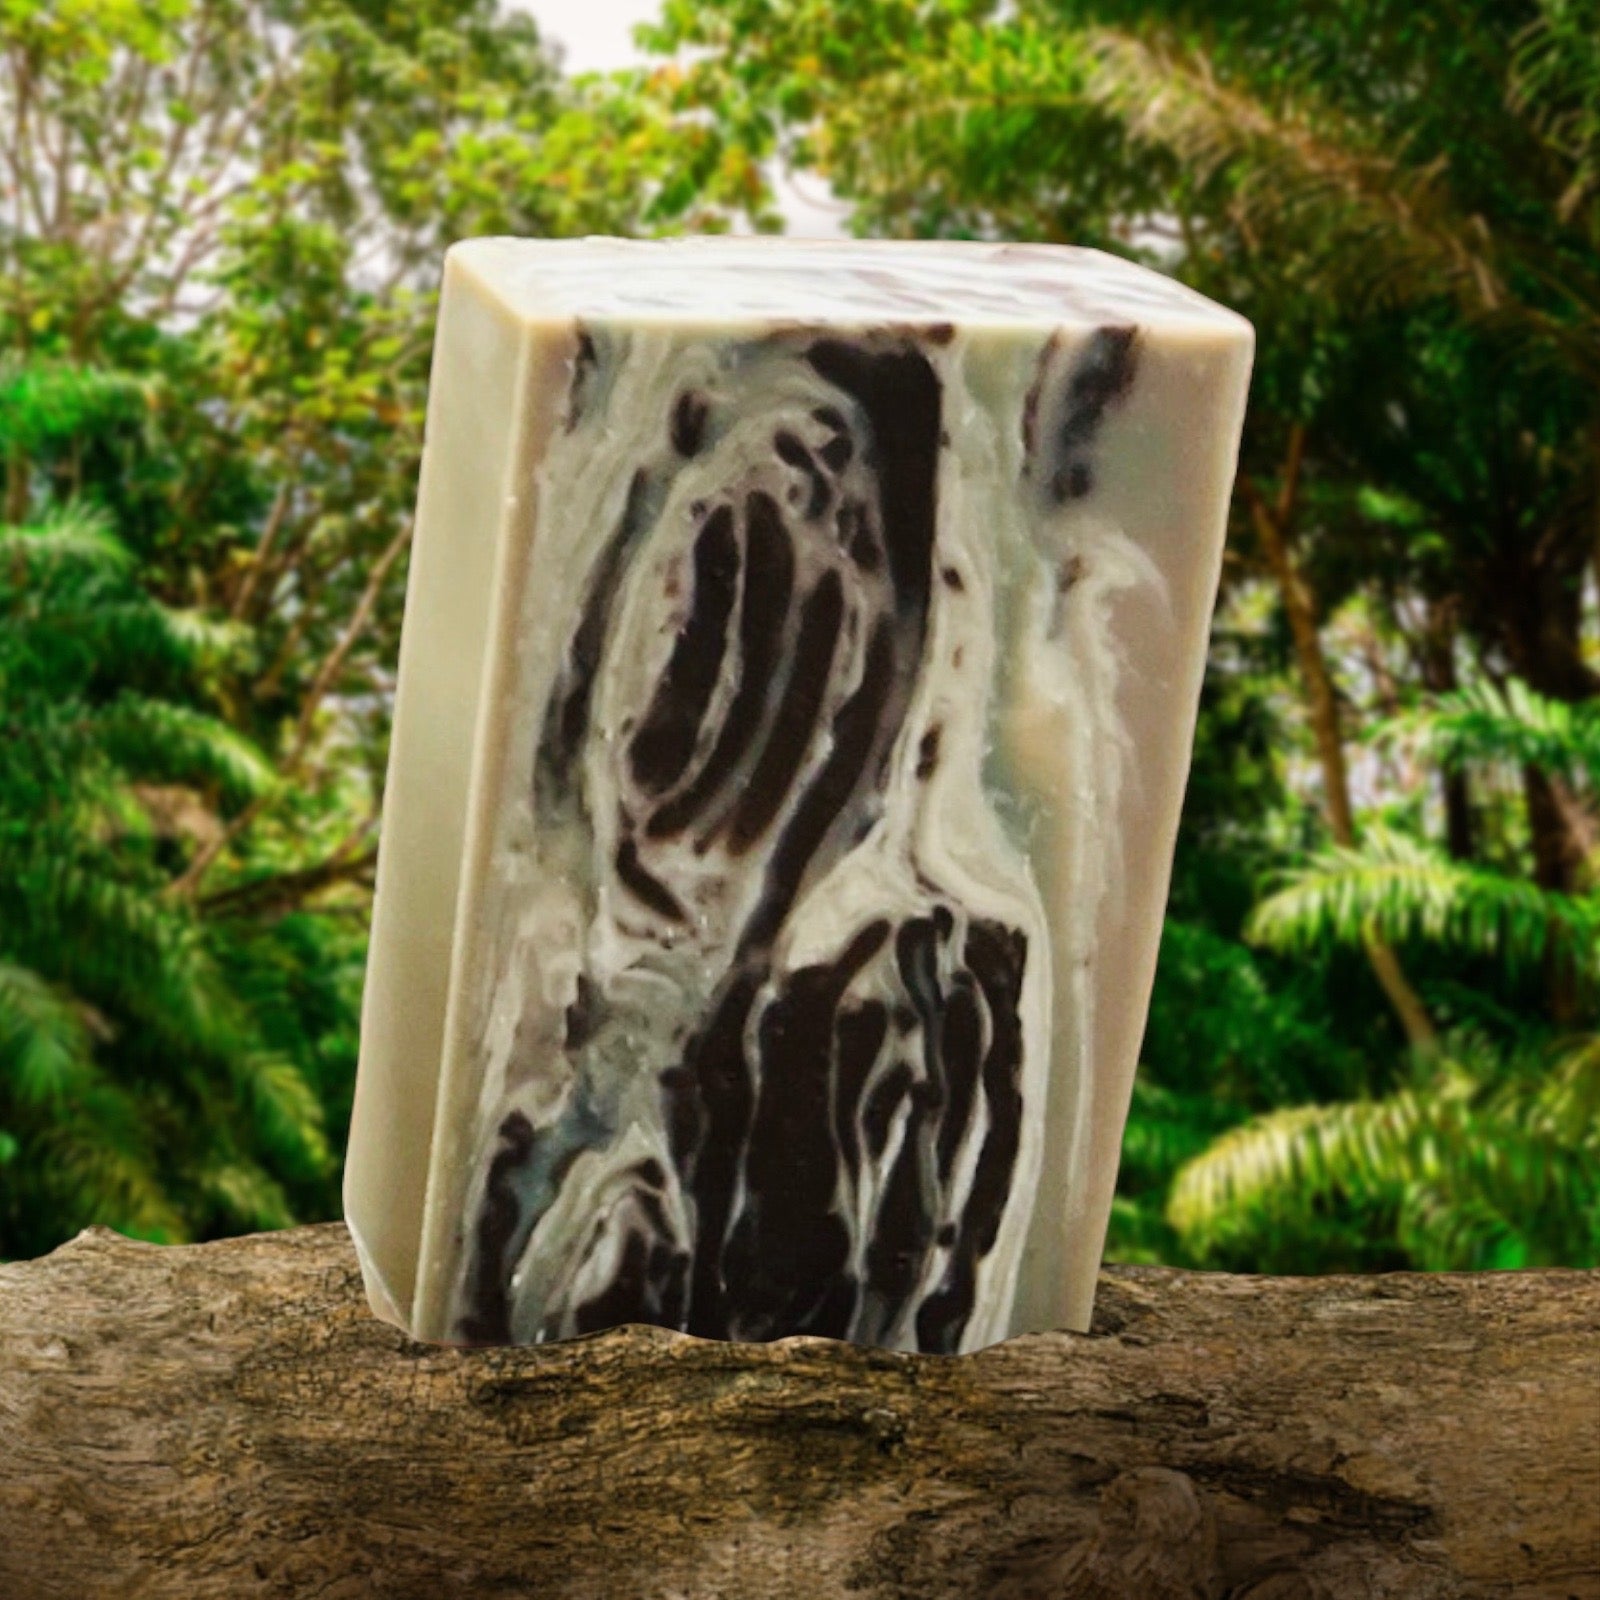 Man in the Woods Soap - a manly scent